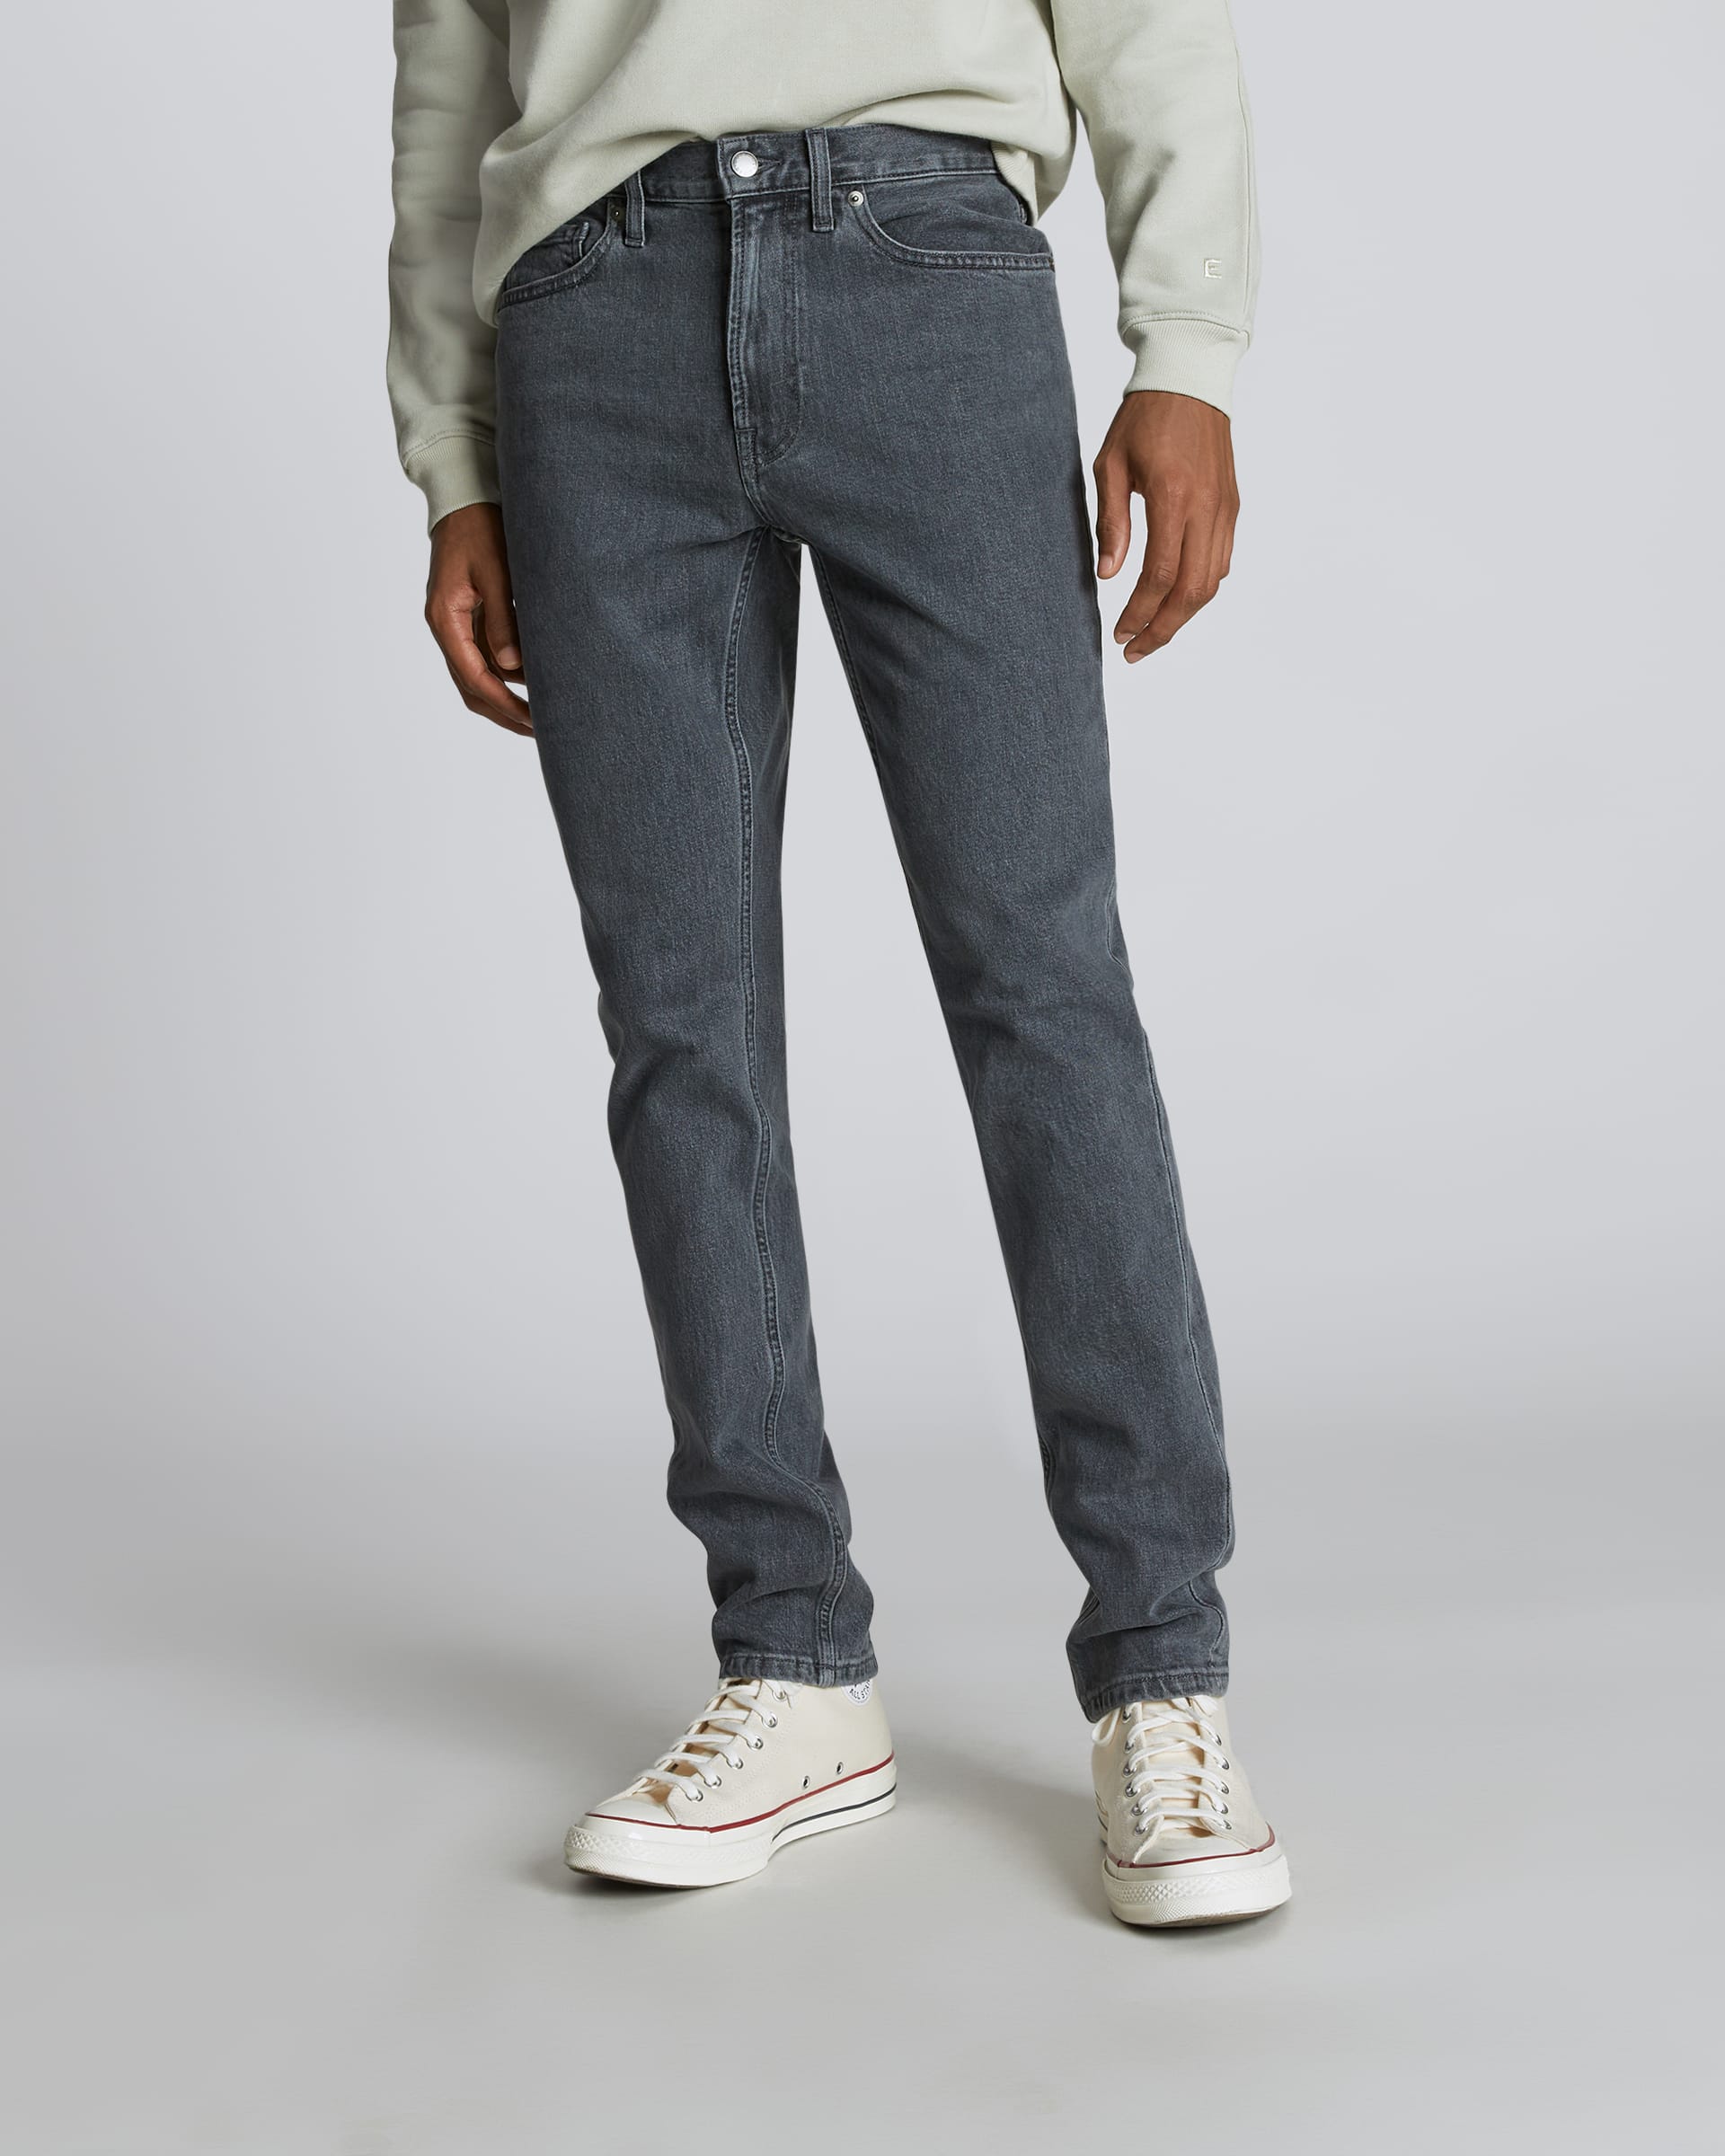 The Organic Cotton Slim Fit Jean Washed Charcoal – Everlane